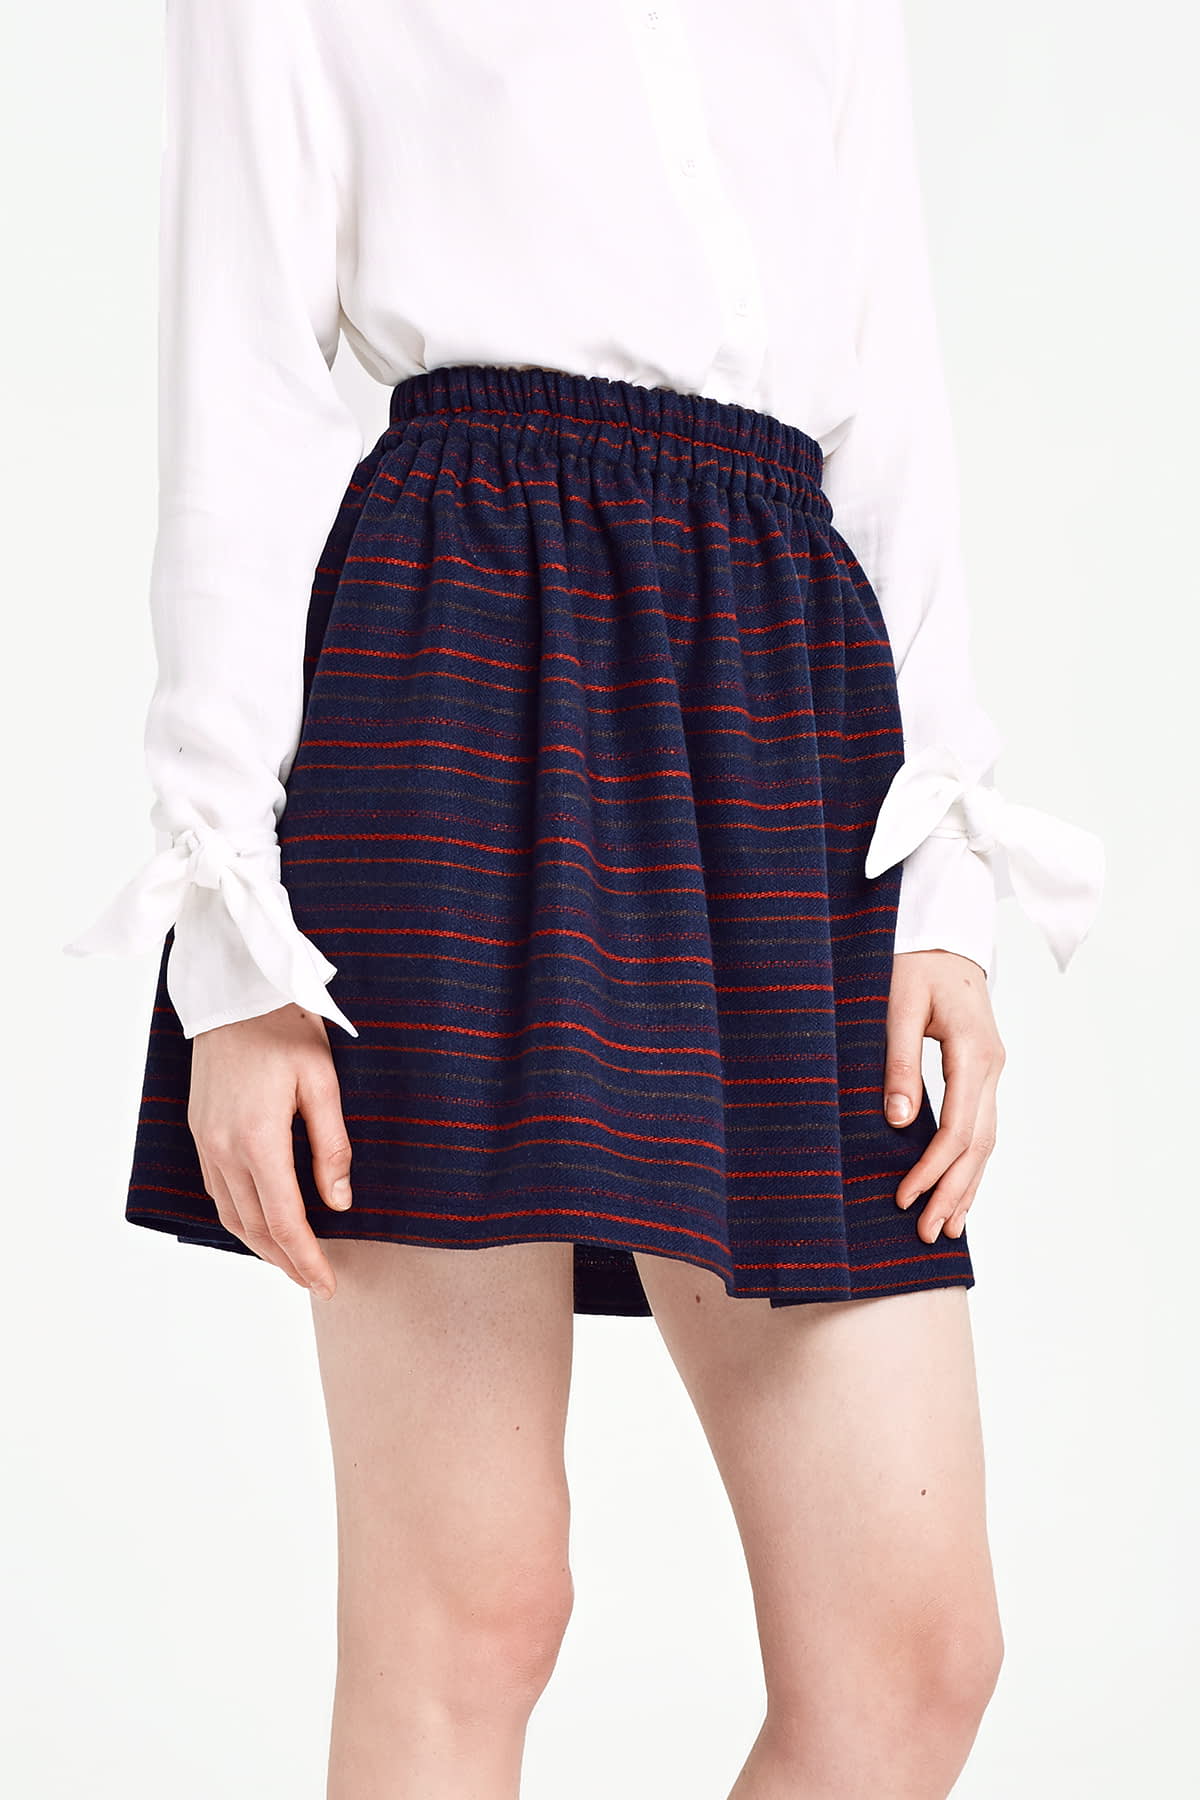 Dark blue skirt with an elastic waistband and red stripes, photo 2